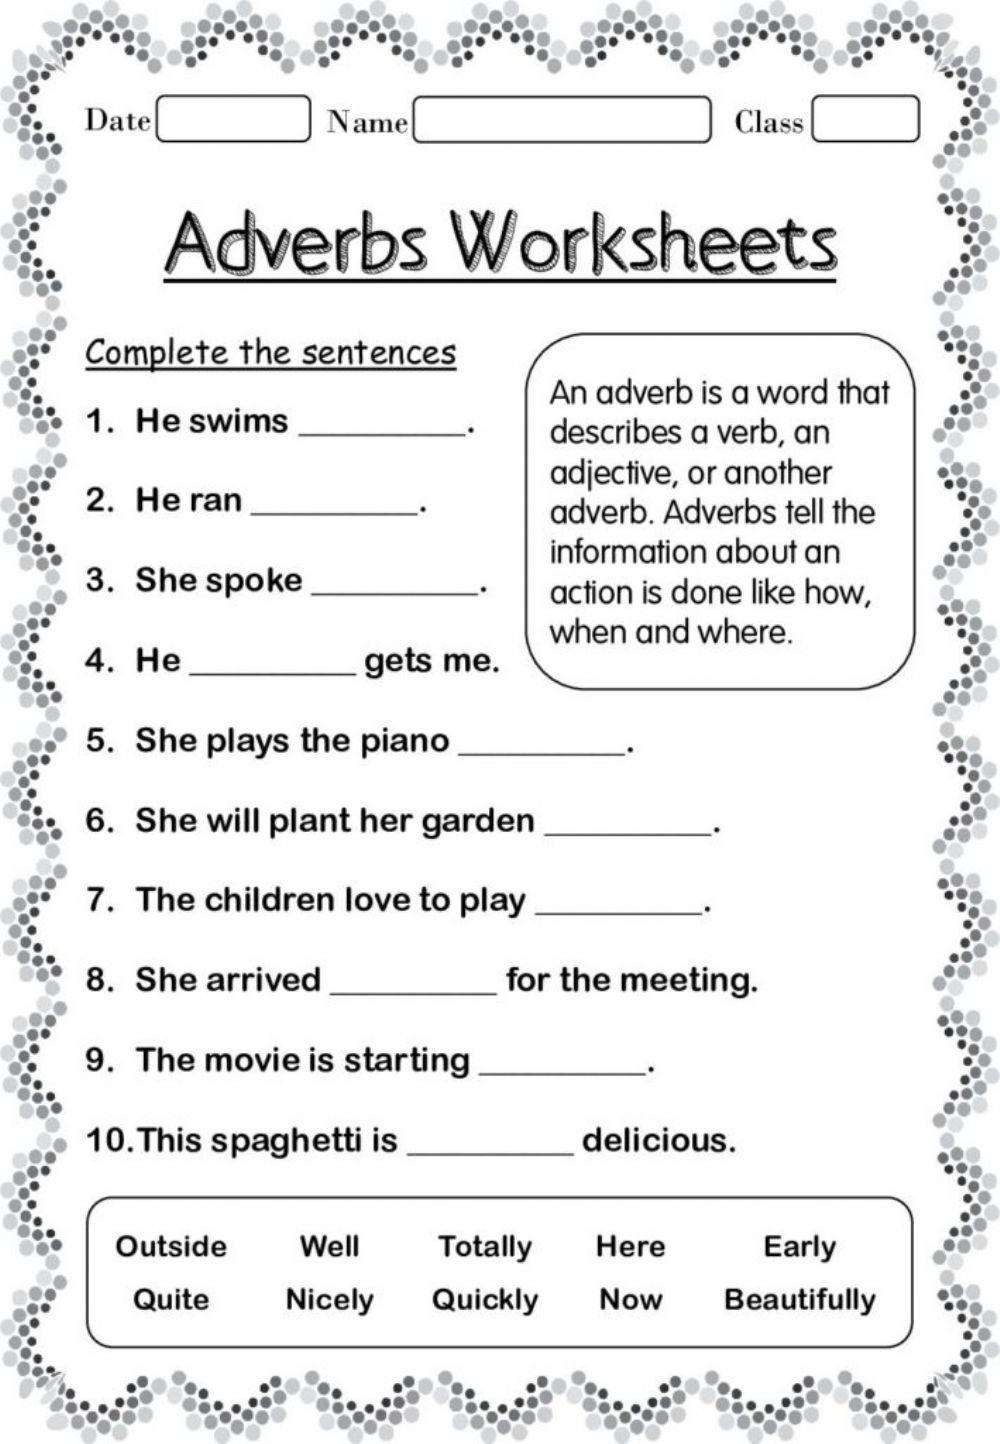 Adverbs Interactive Worksheet For 4 TO 6 Live Worksheets